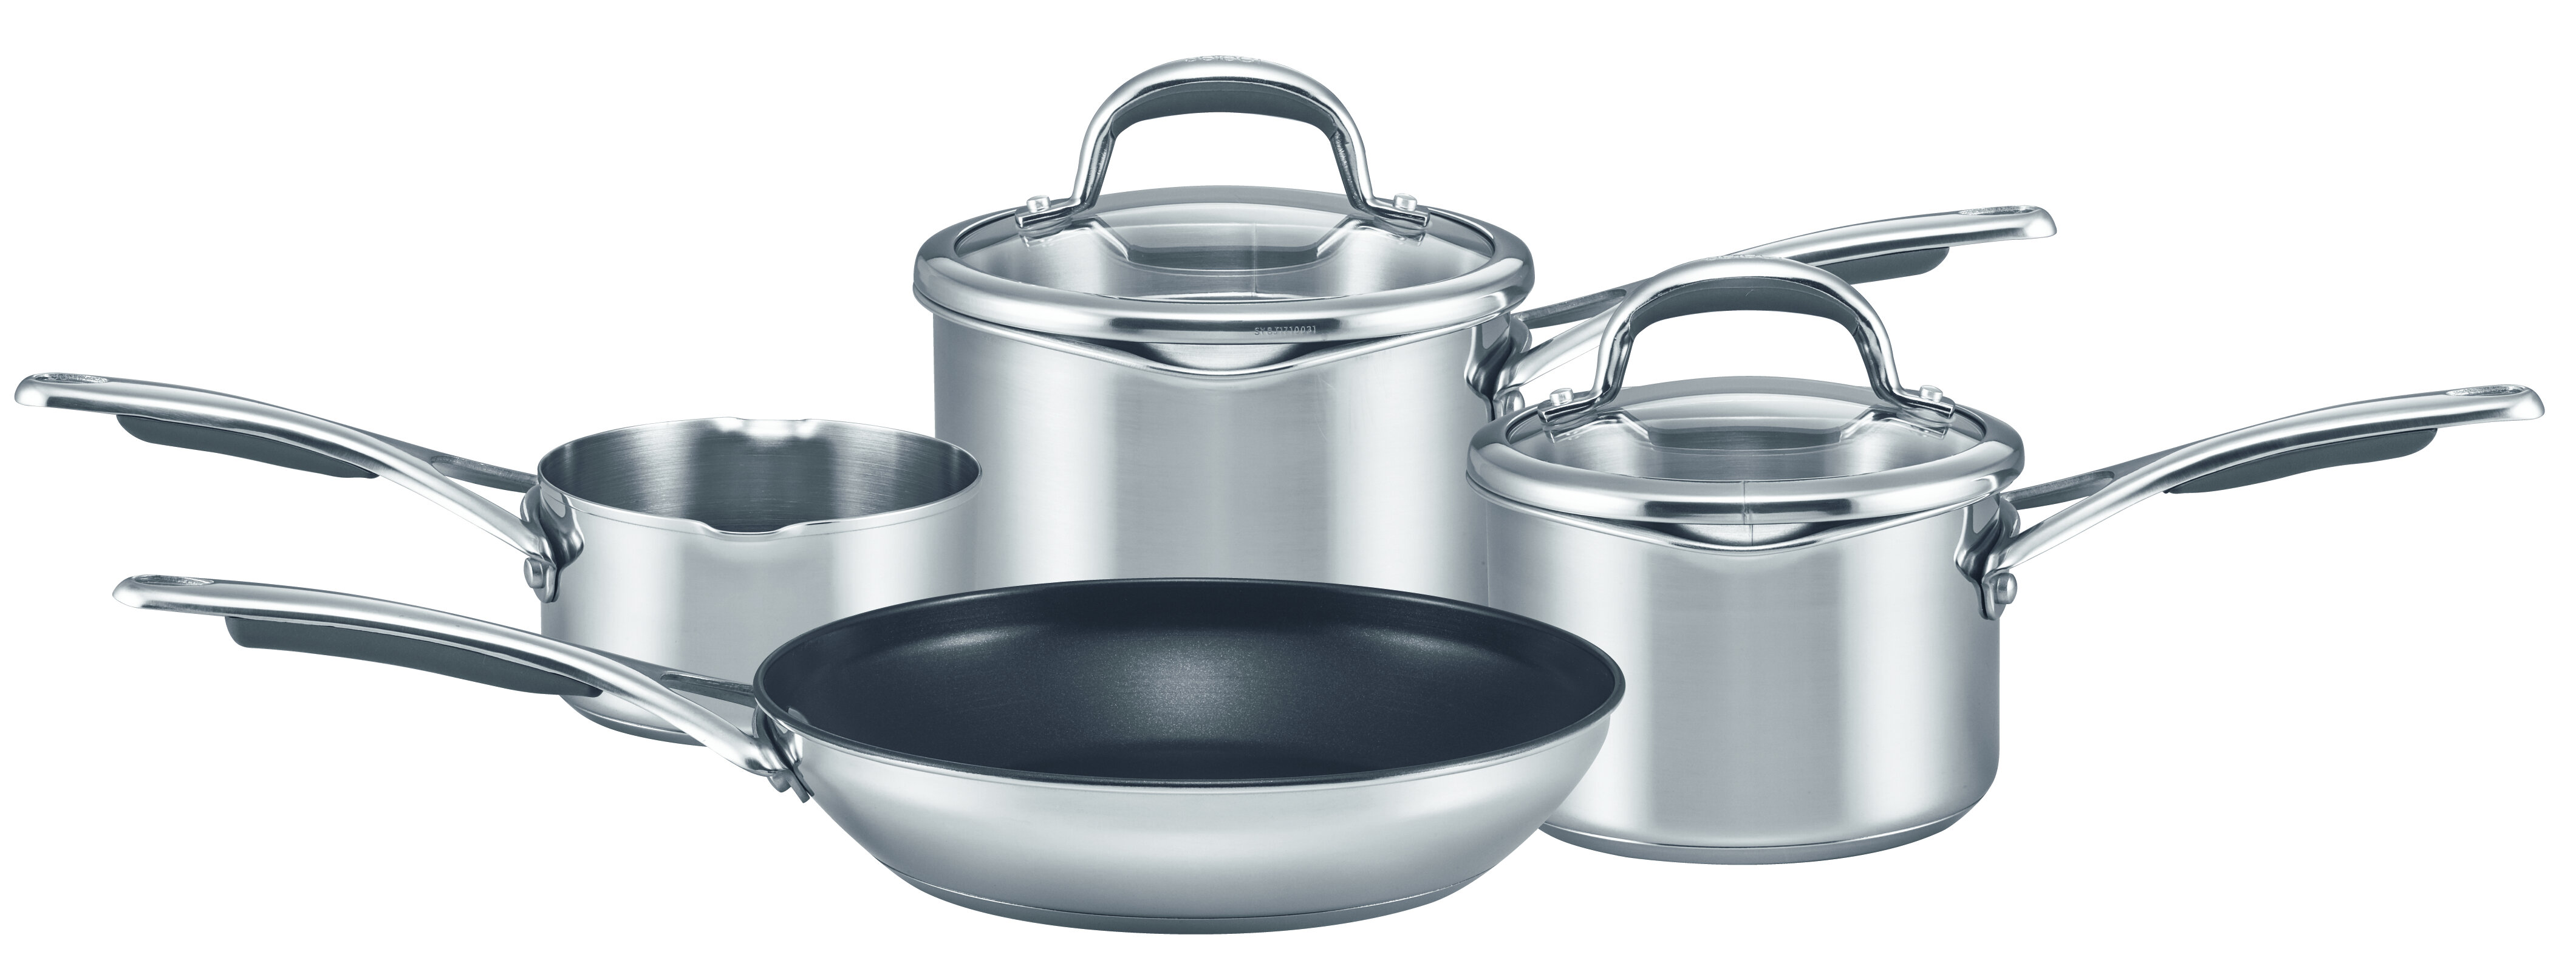 Meyer Stainless Steel Induction 5 Piece Cookware Set 10 Year Guarantee.